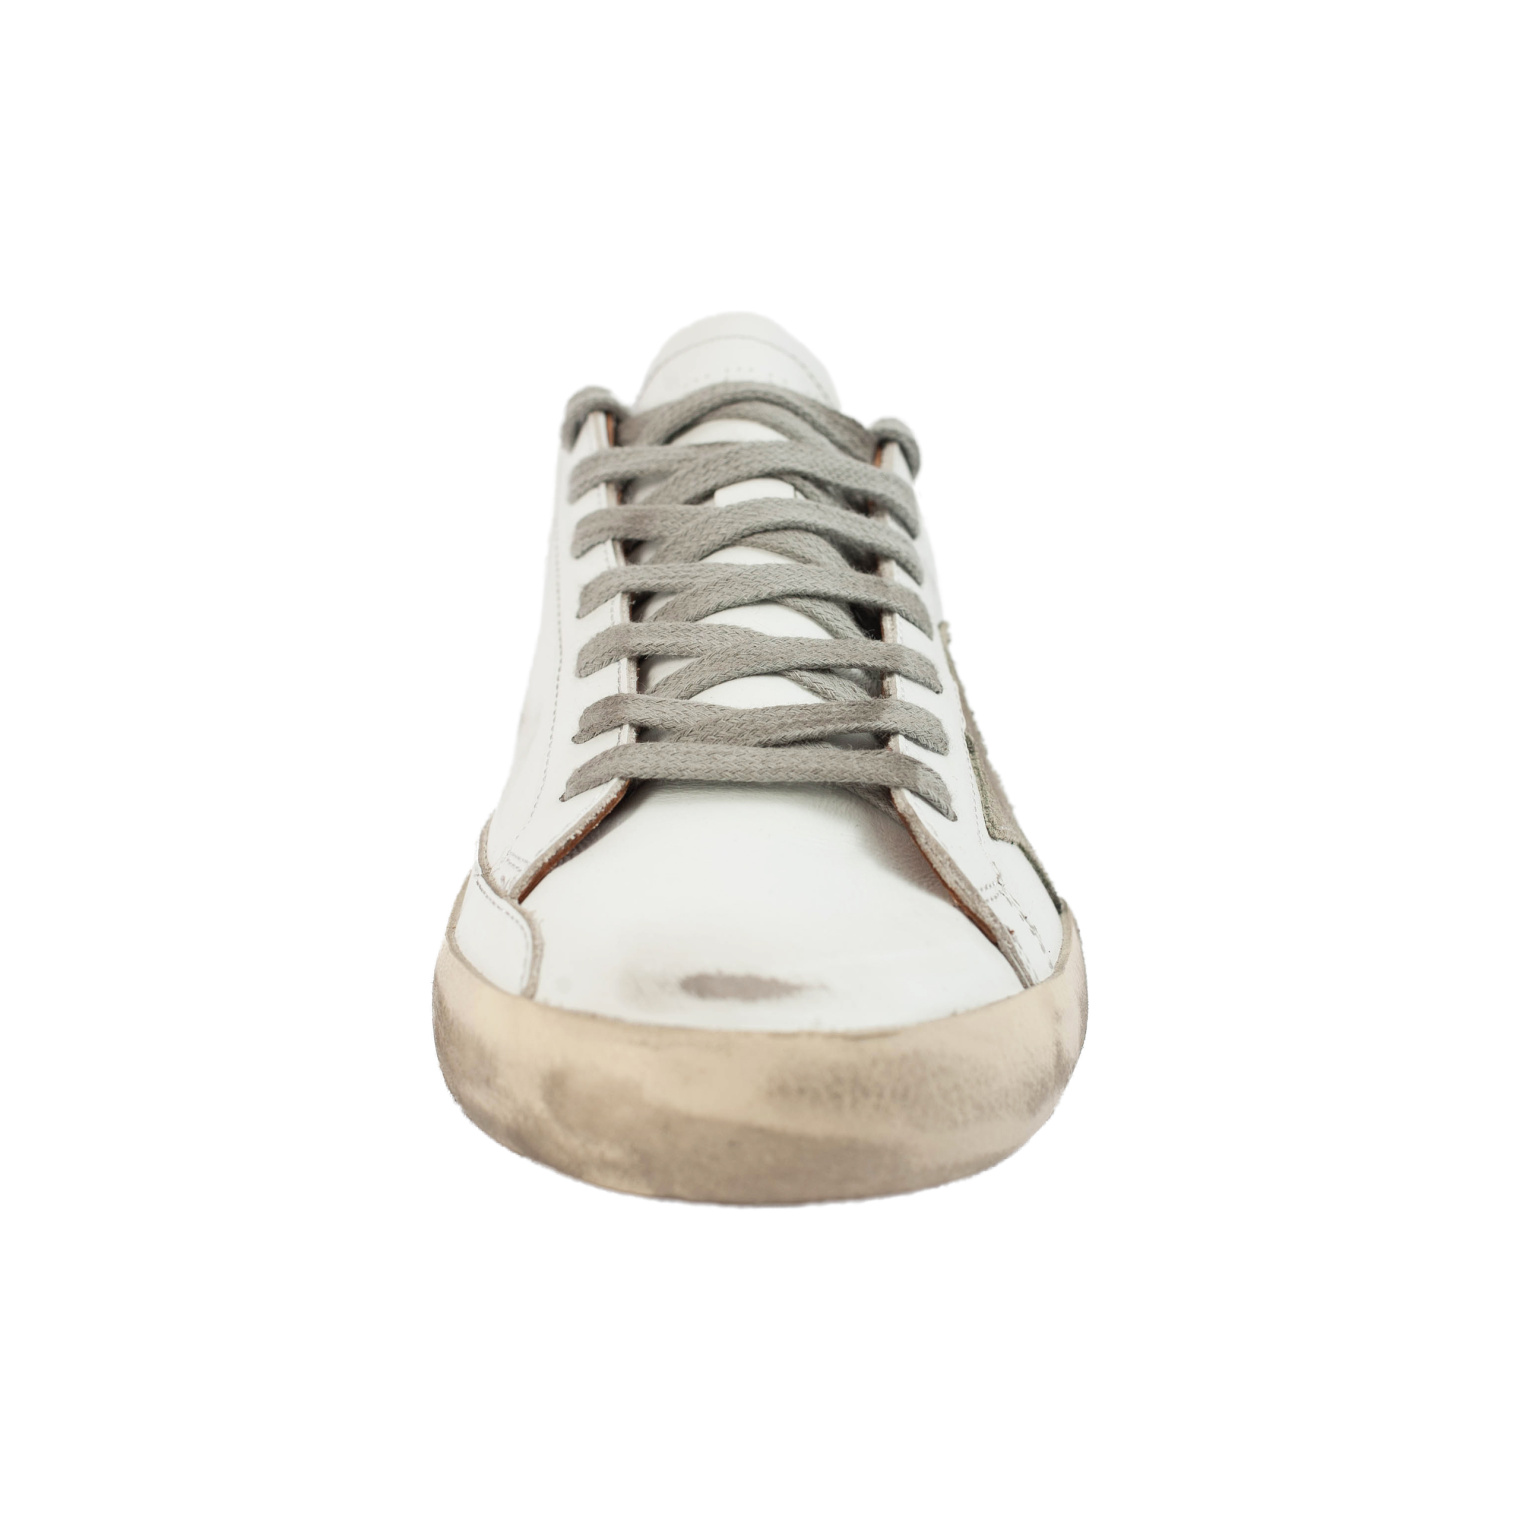 Golden Goose Superstar White Leather Sneakers